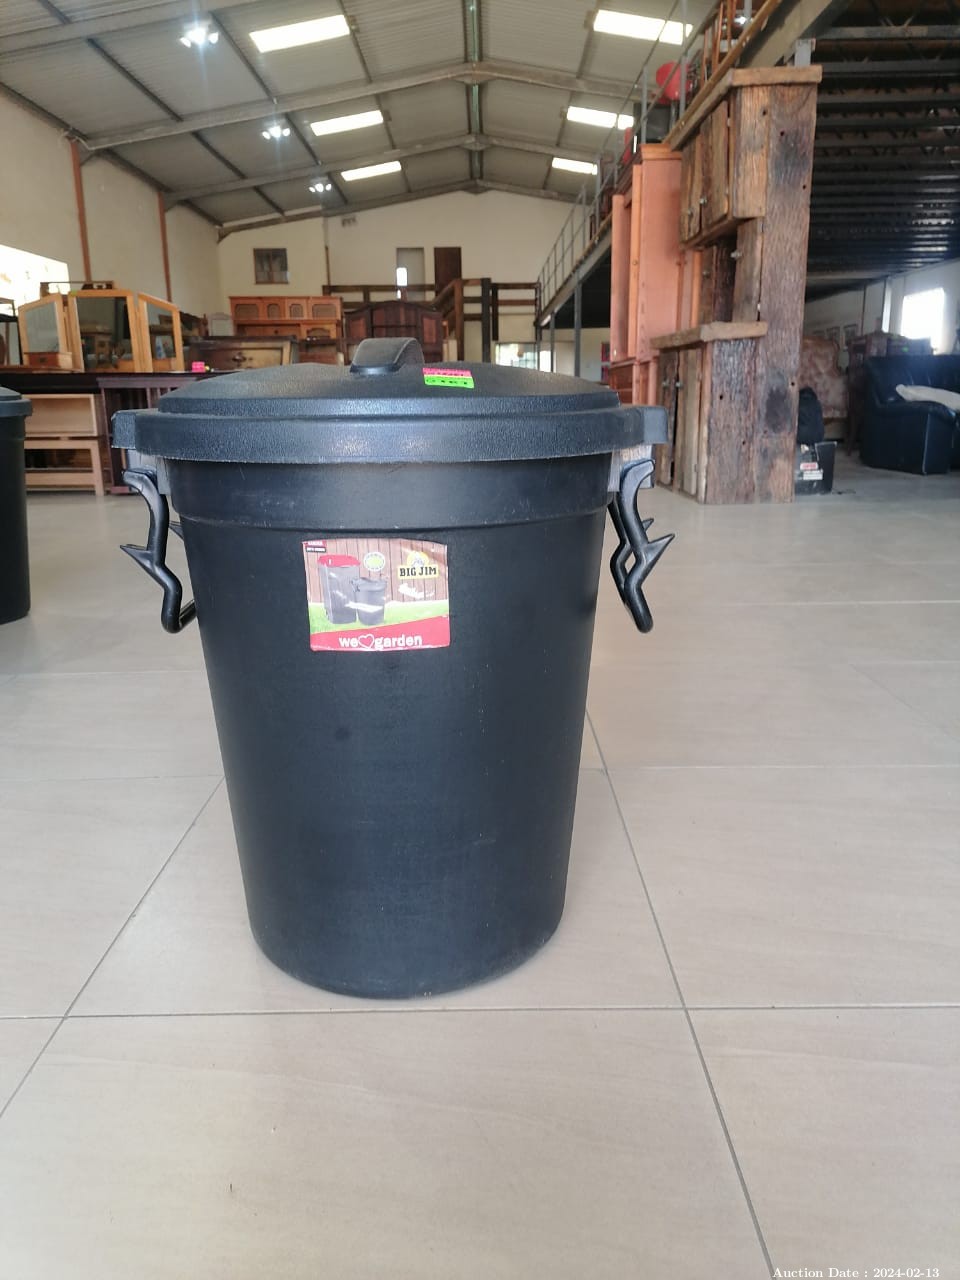 5351 - Composite Bin with a Lid